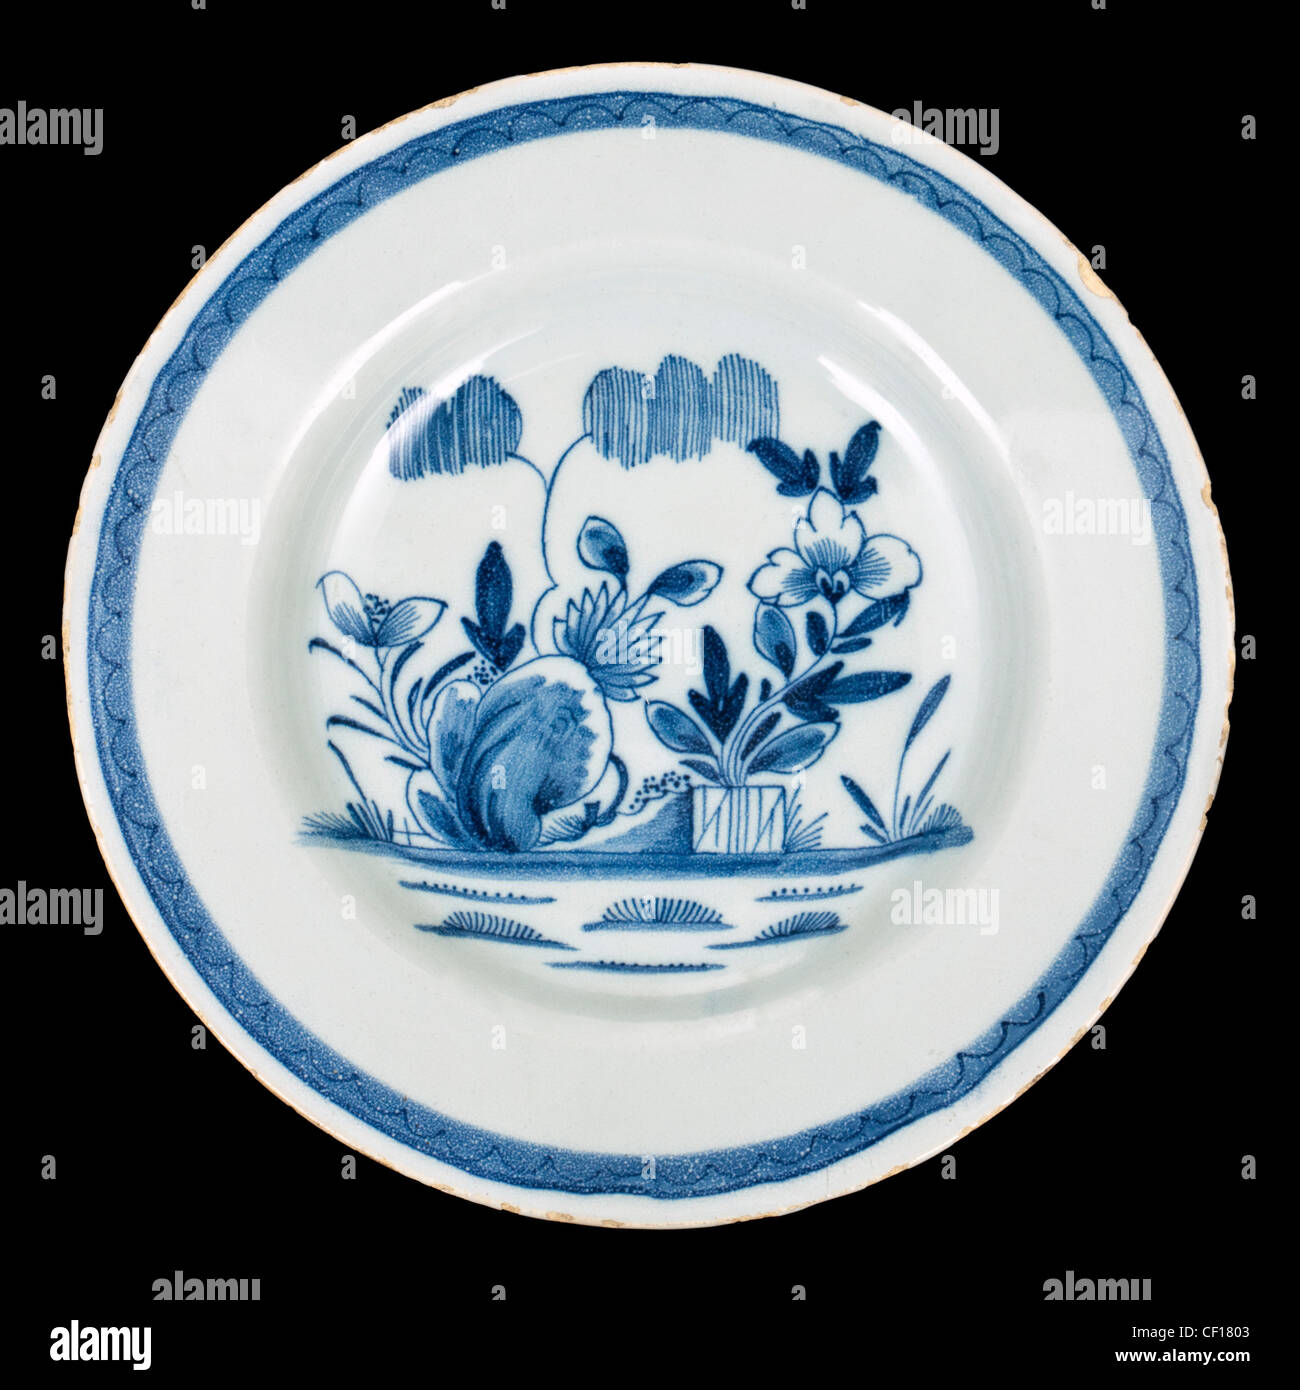 Antique Delft plate with painted underglaze Chinoiserie style flowers Stock Photo